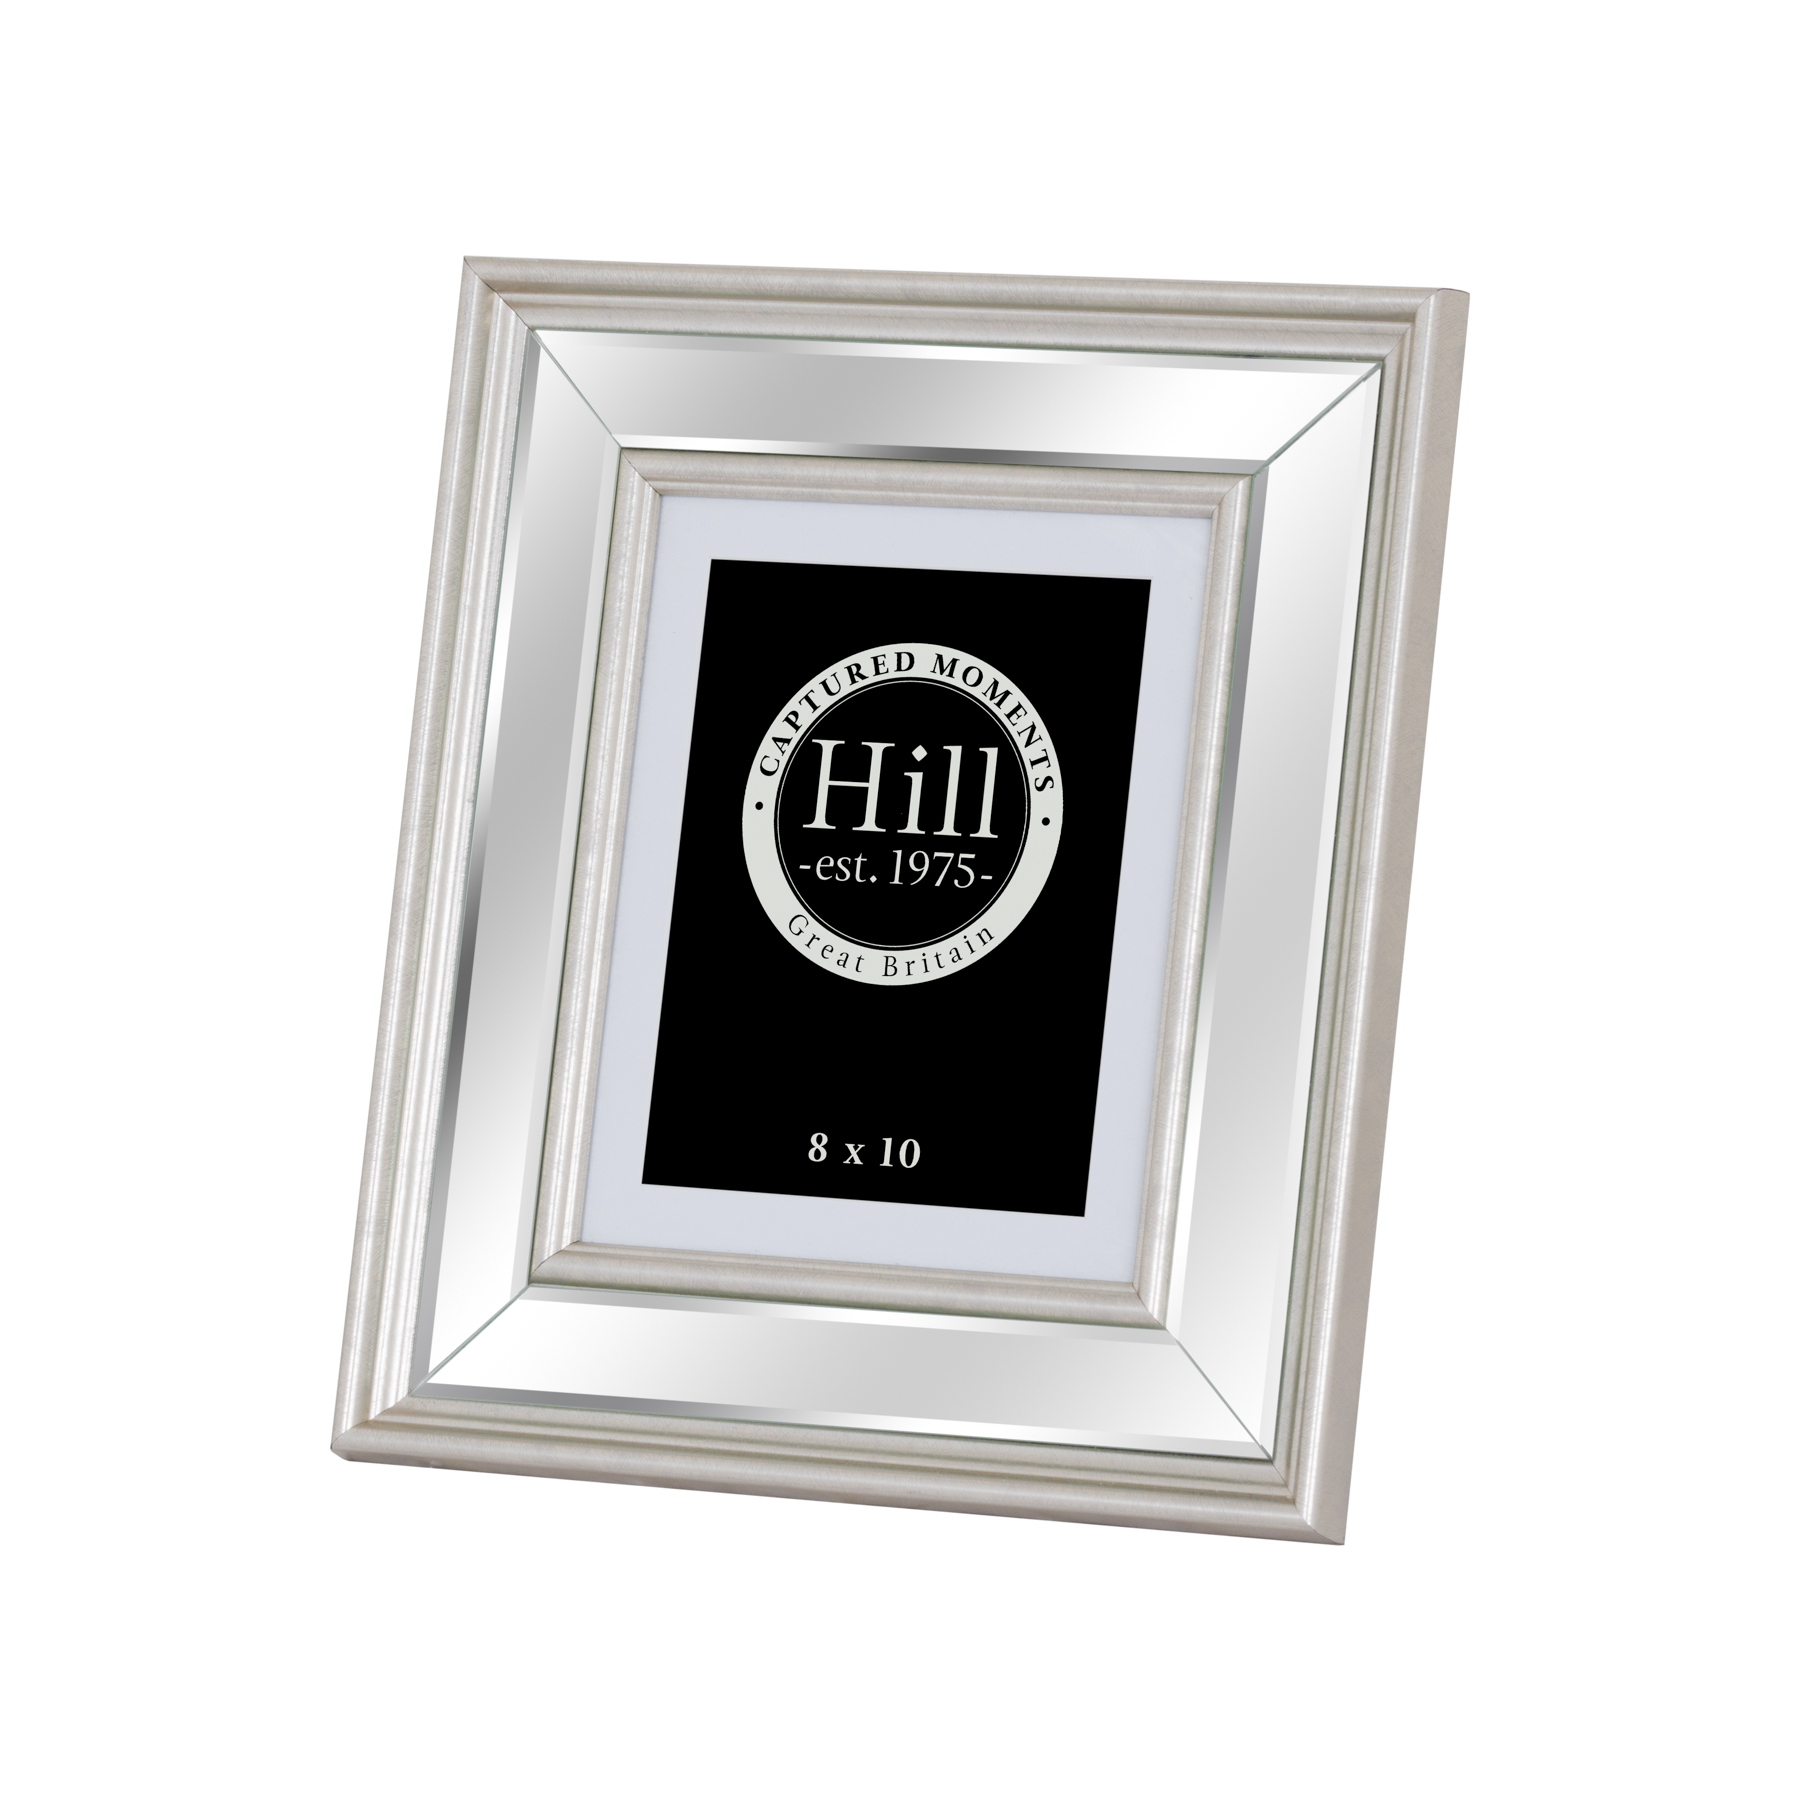 Silver Bevelled Mirrored Photo Frame 8X10 - Image 1